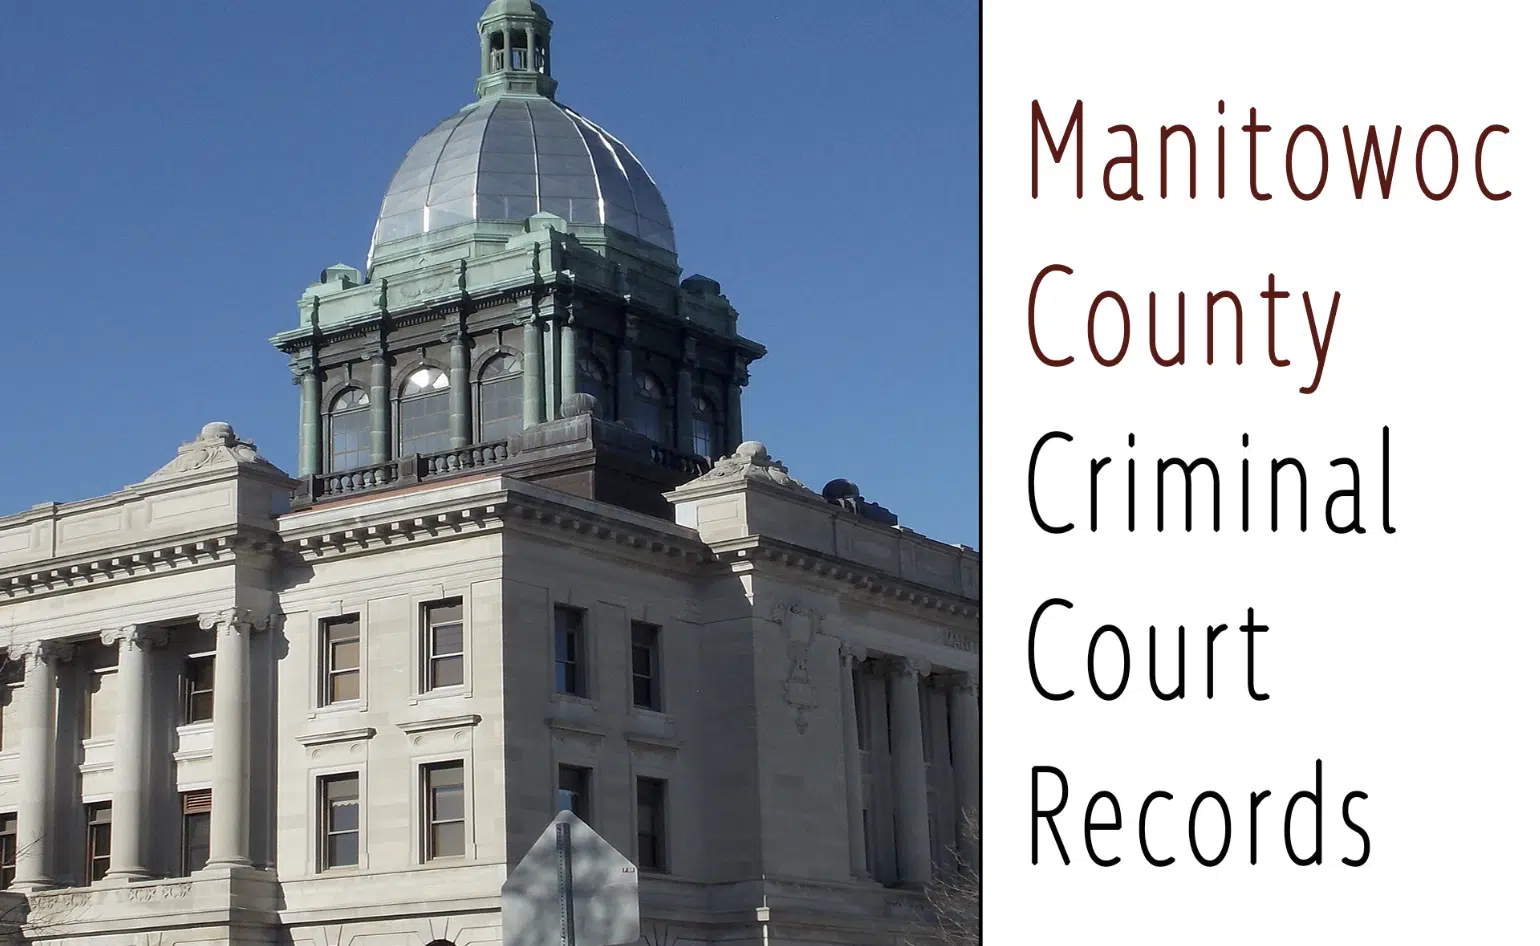 Manitowoc County Criminal Court Records